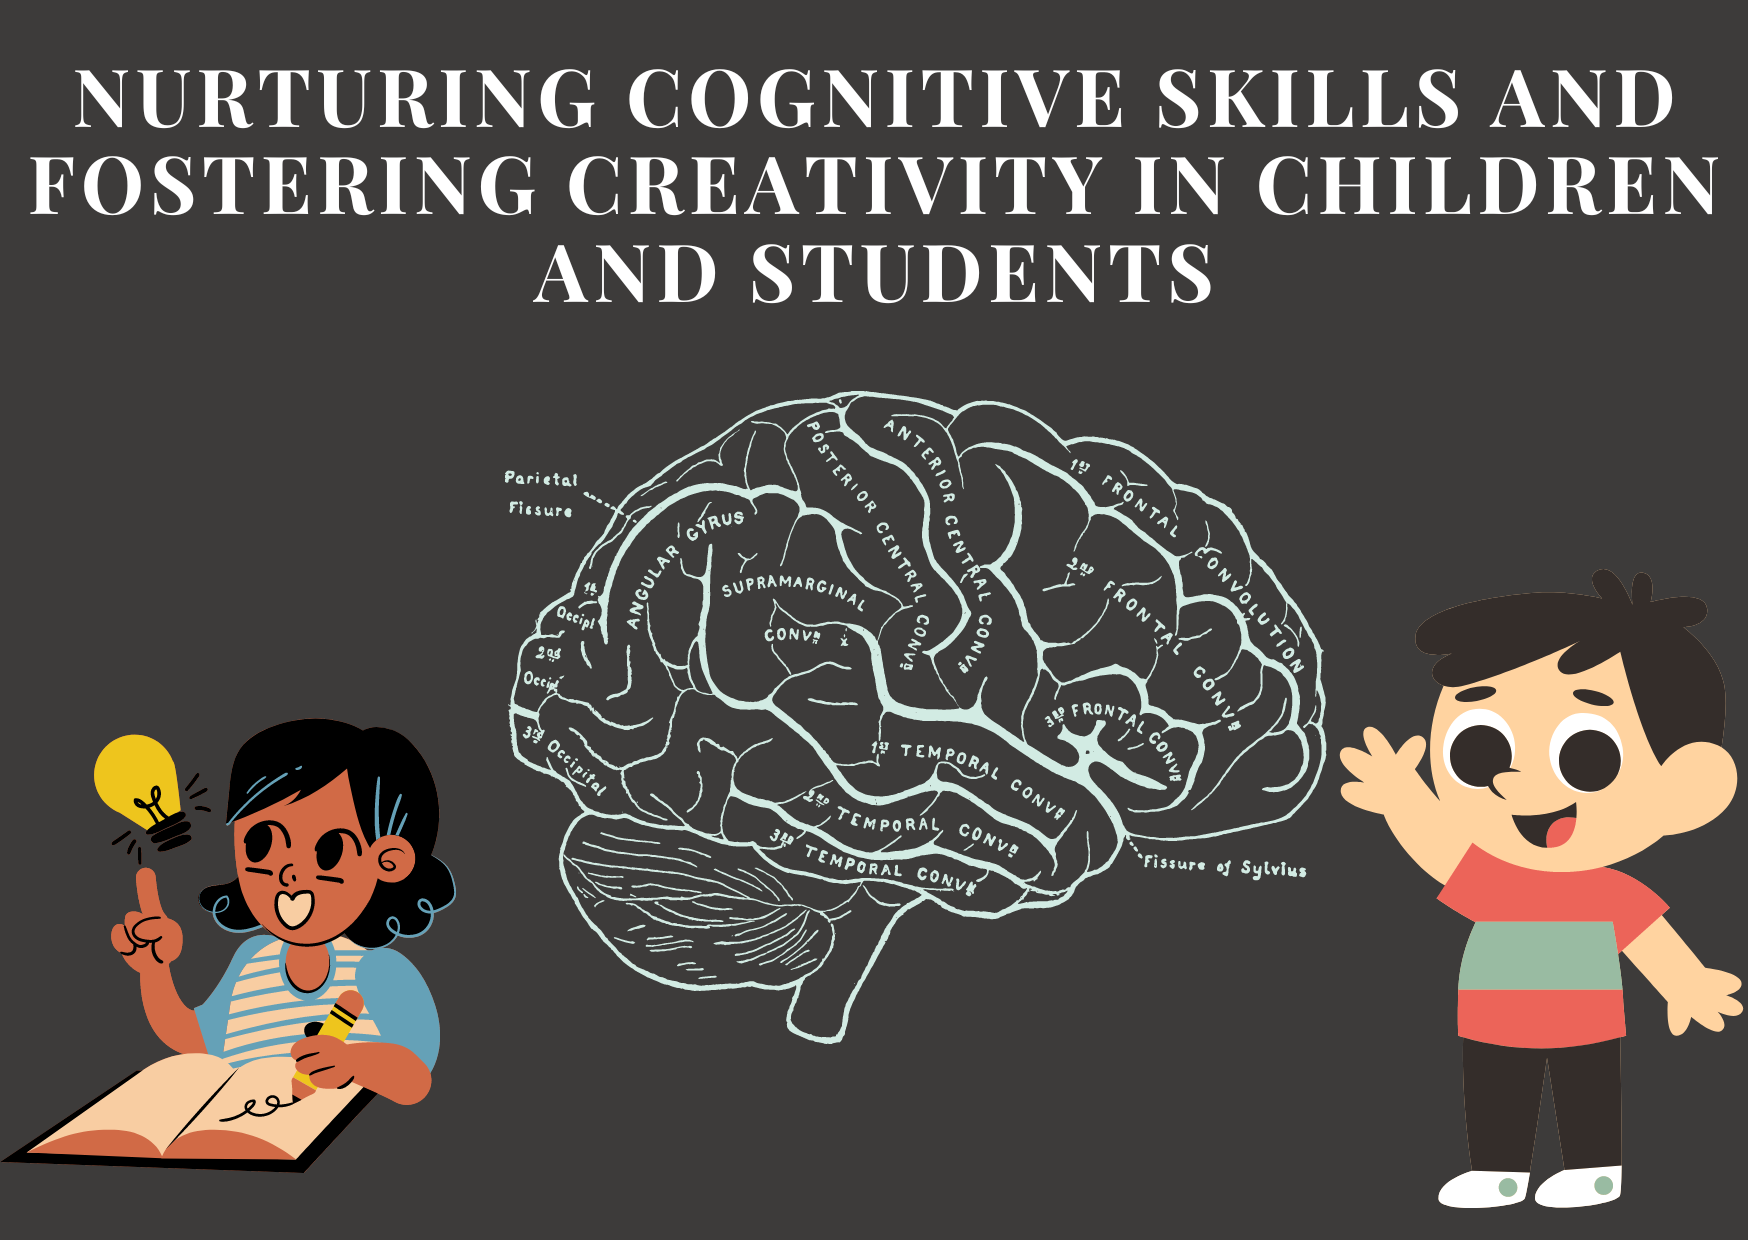 Nurturing Cognitive Skills and Fostering Creativity in Children and Students